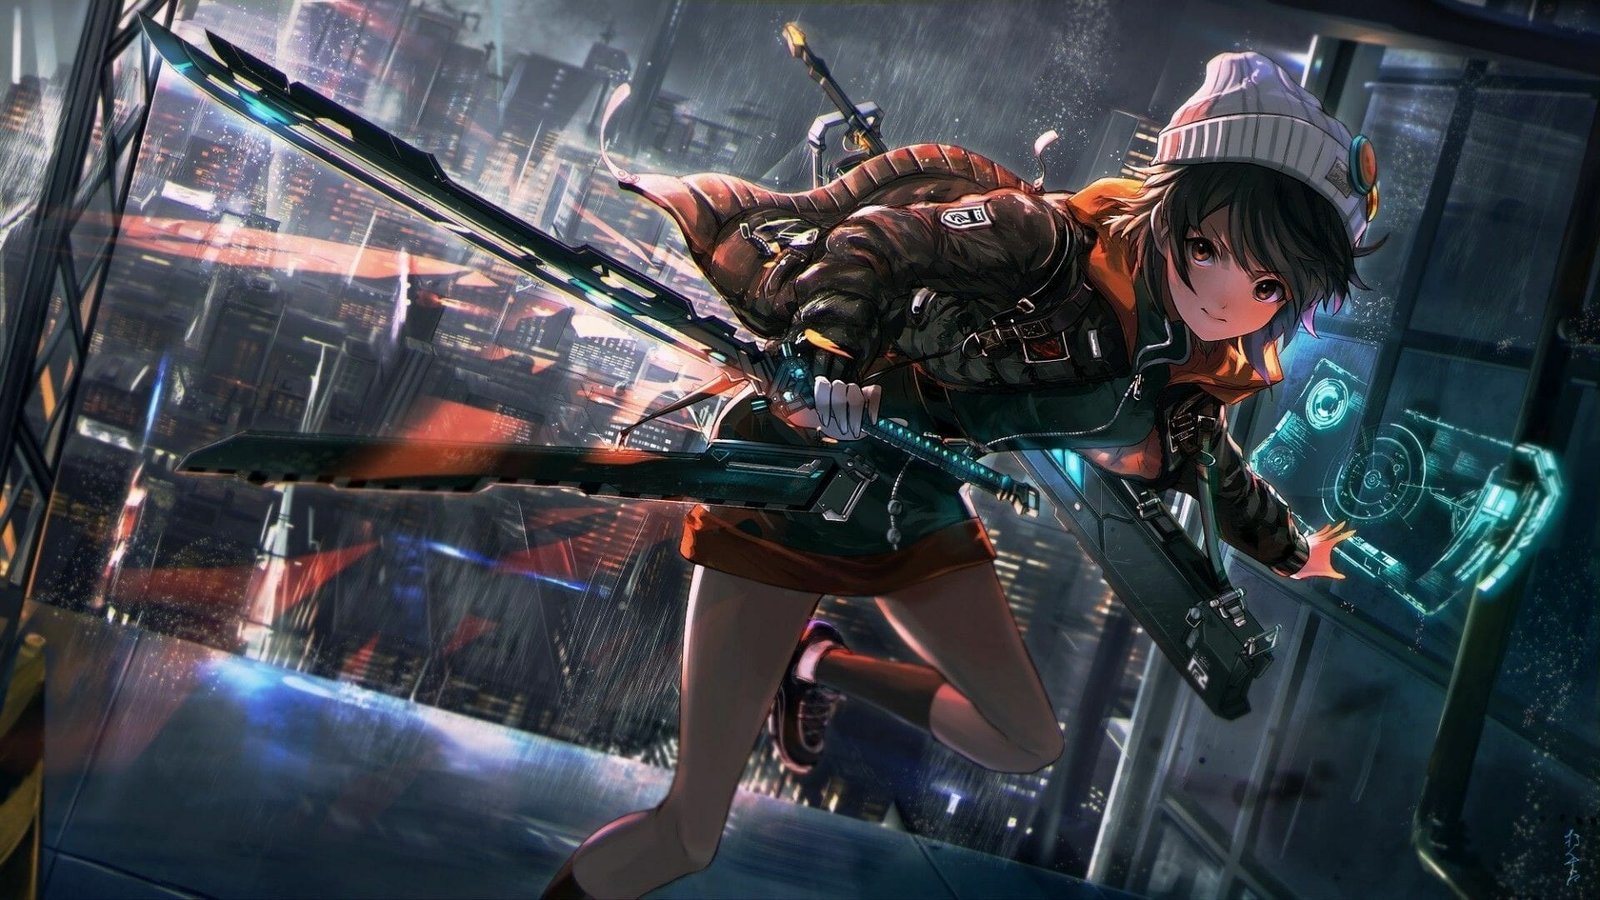 Top 49 Best Cyberpunk Anime Of All Time